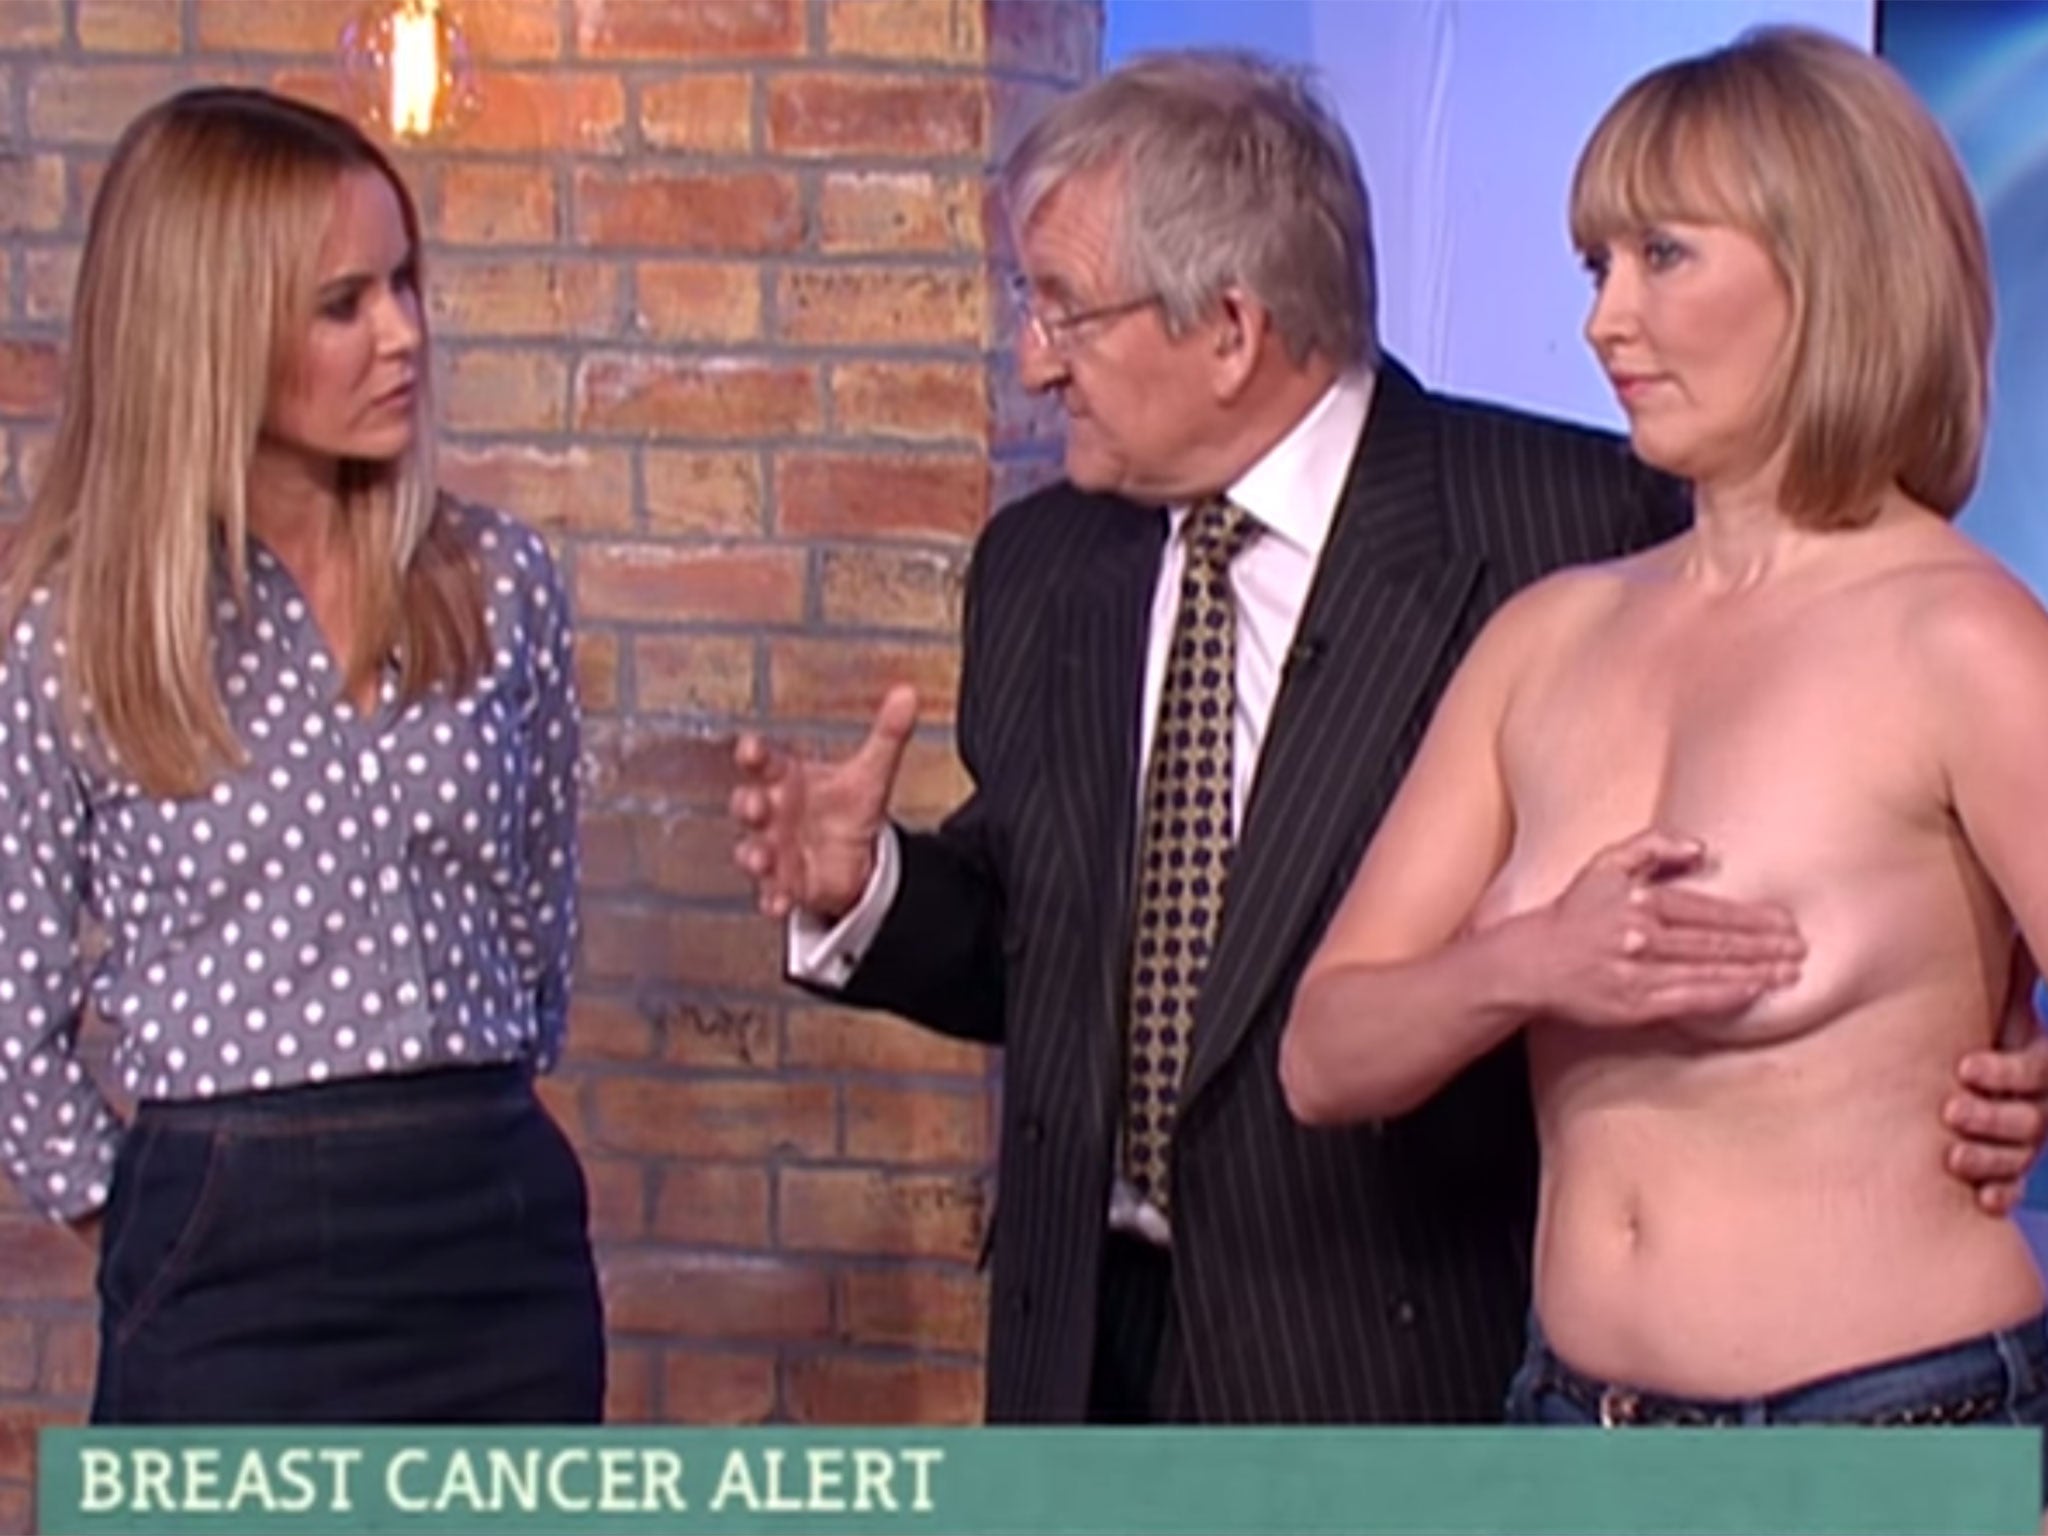 Cancer Porn - This Morning airs bare breasts in cancer awareness segment ...